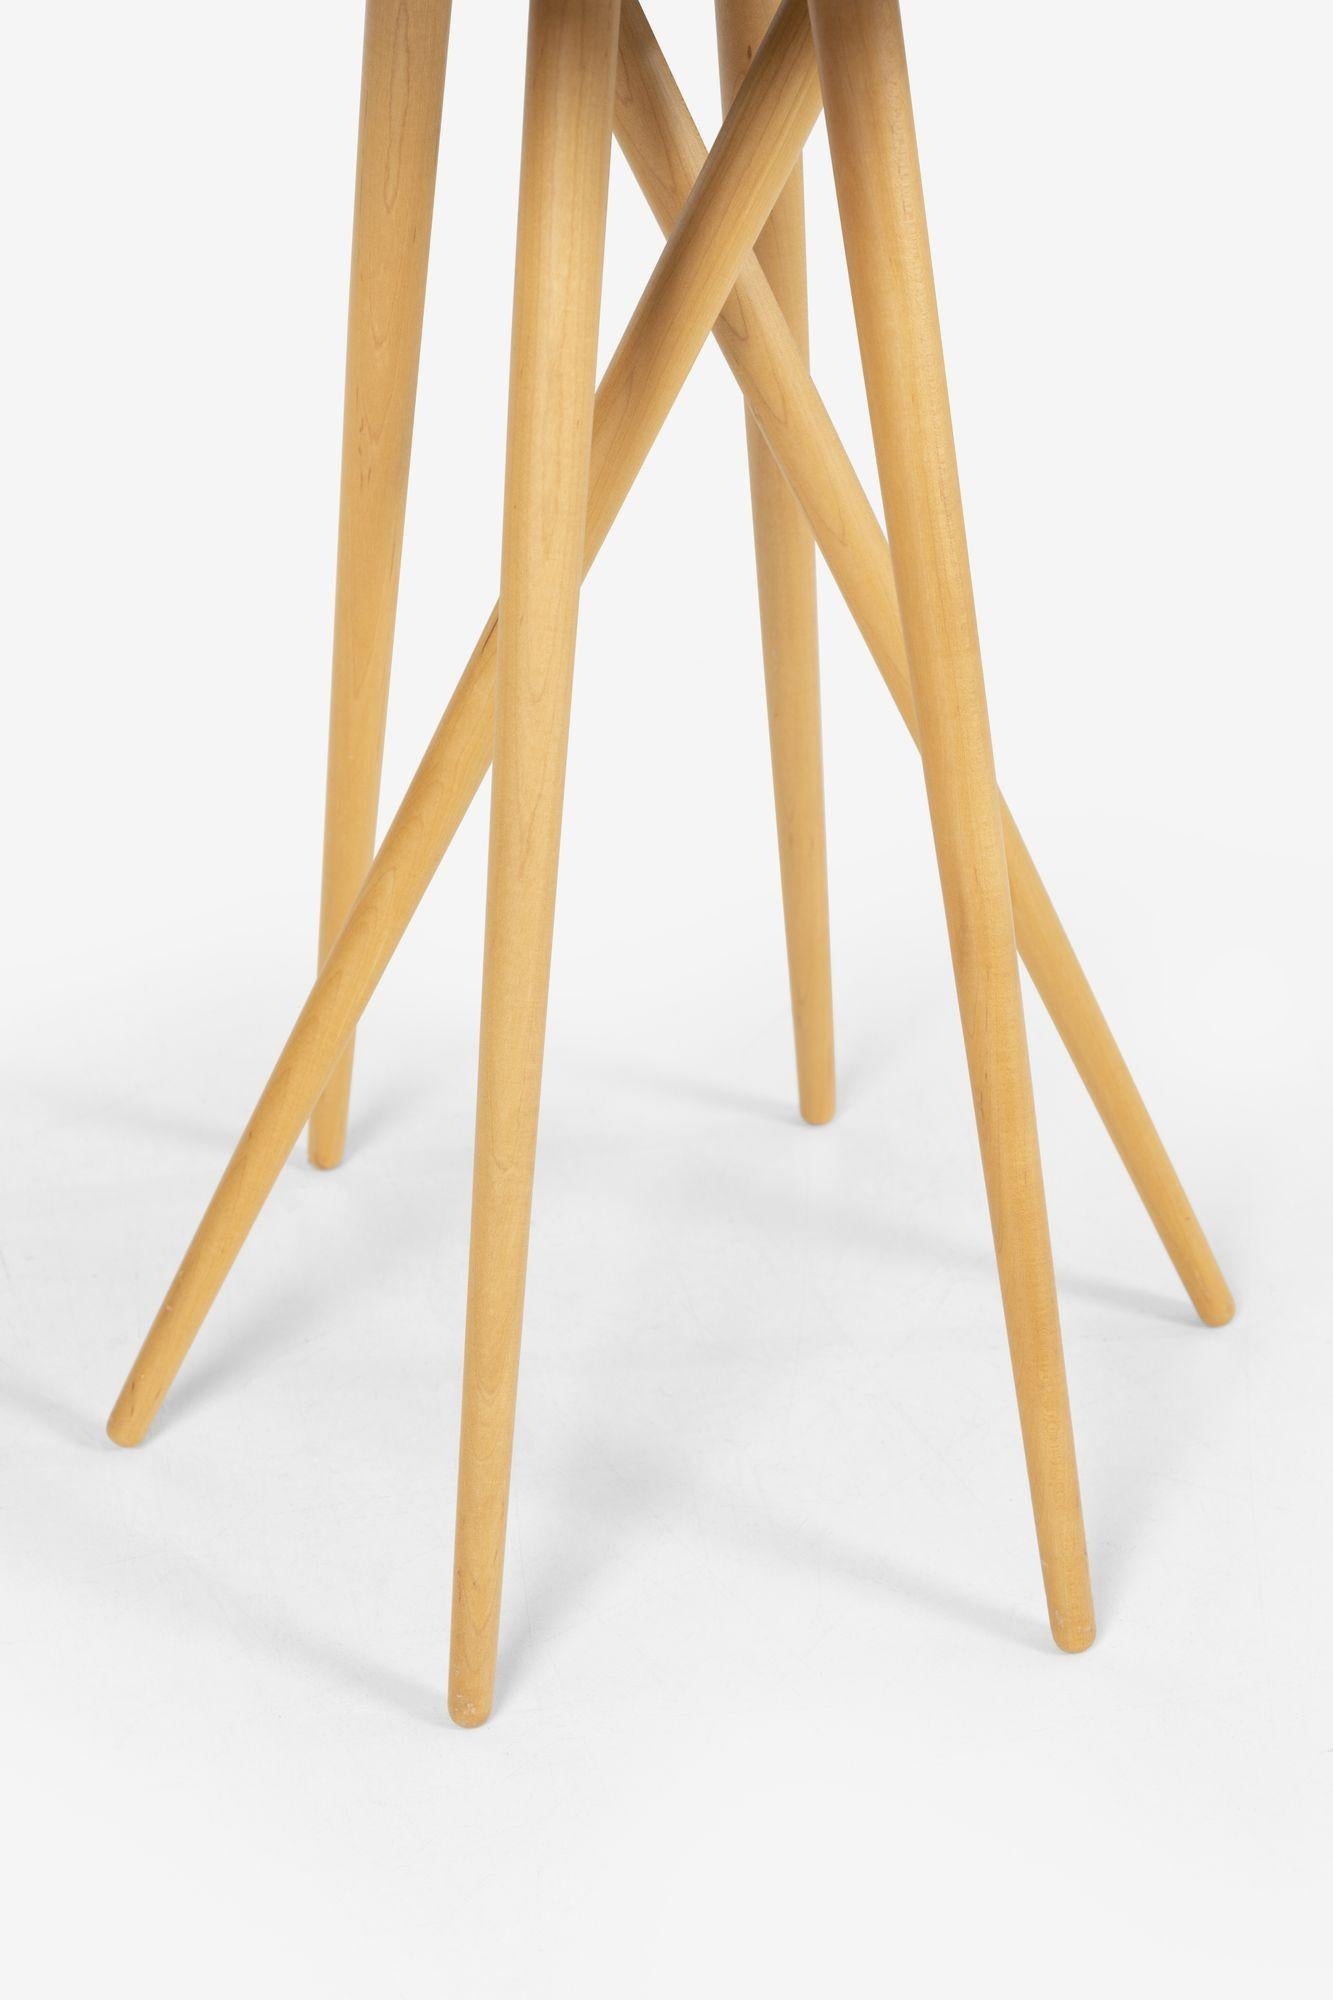 Industrial Lawrence Laske Toothpick Cactus Table for Knoll Studio, model 81TR20 For Sale